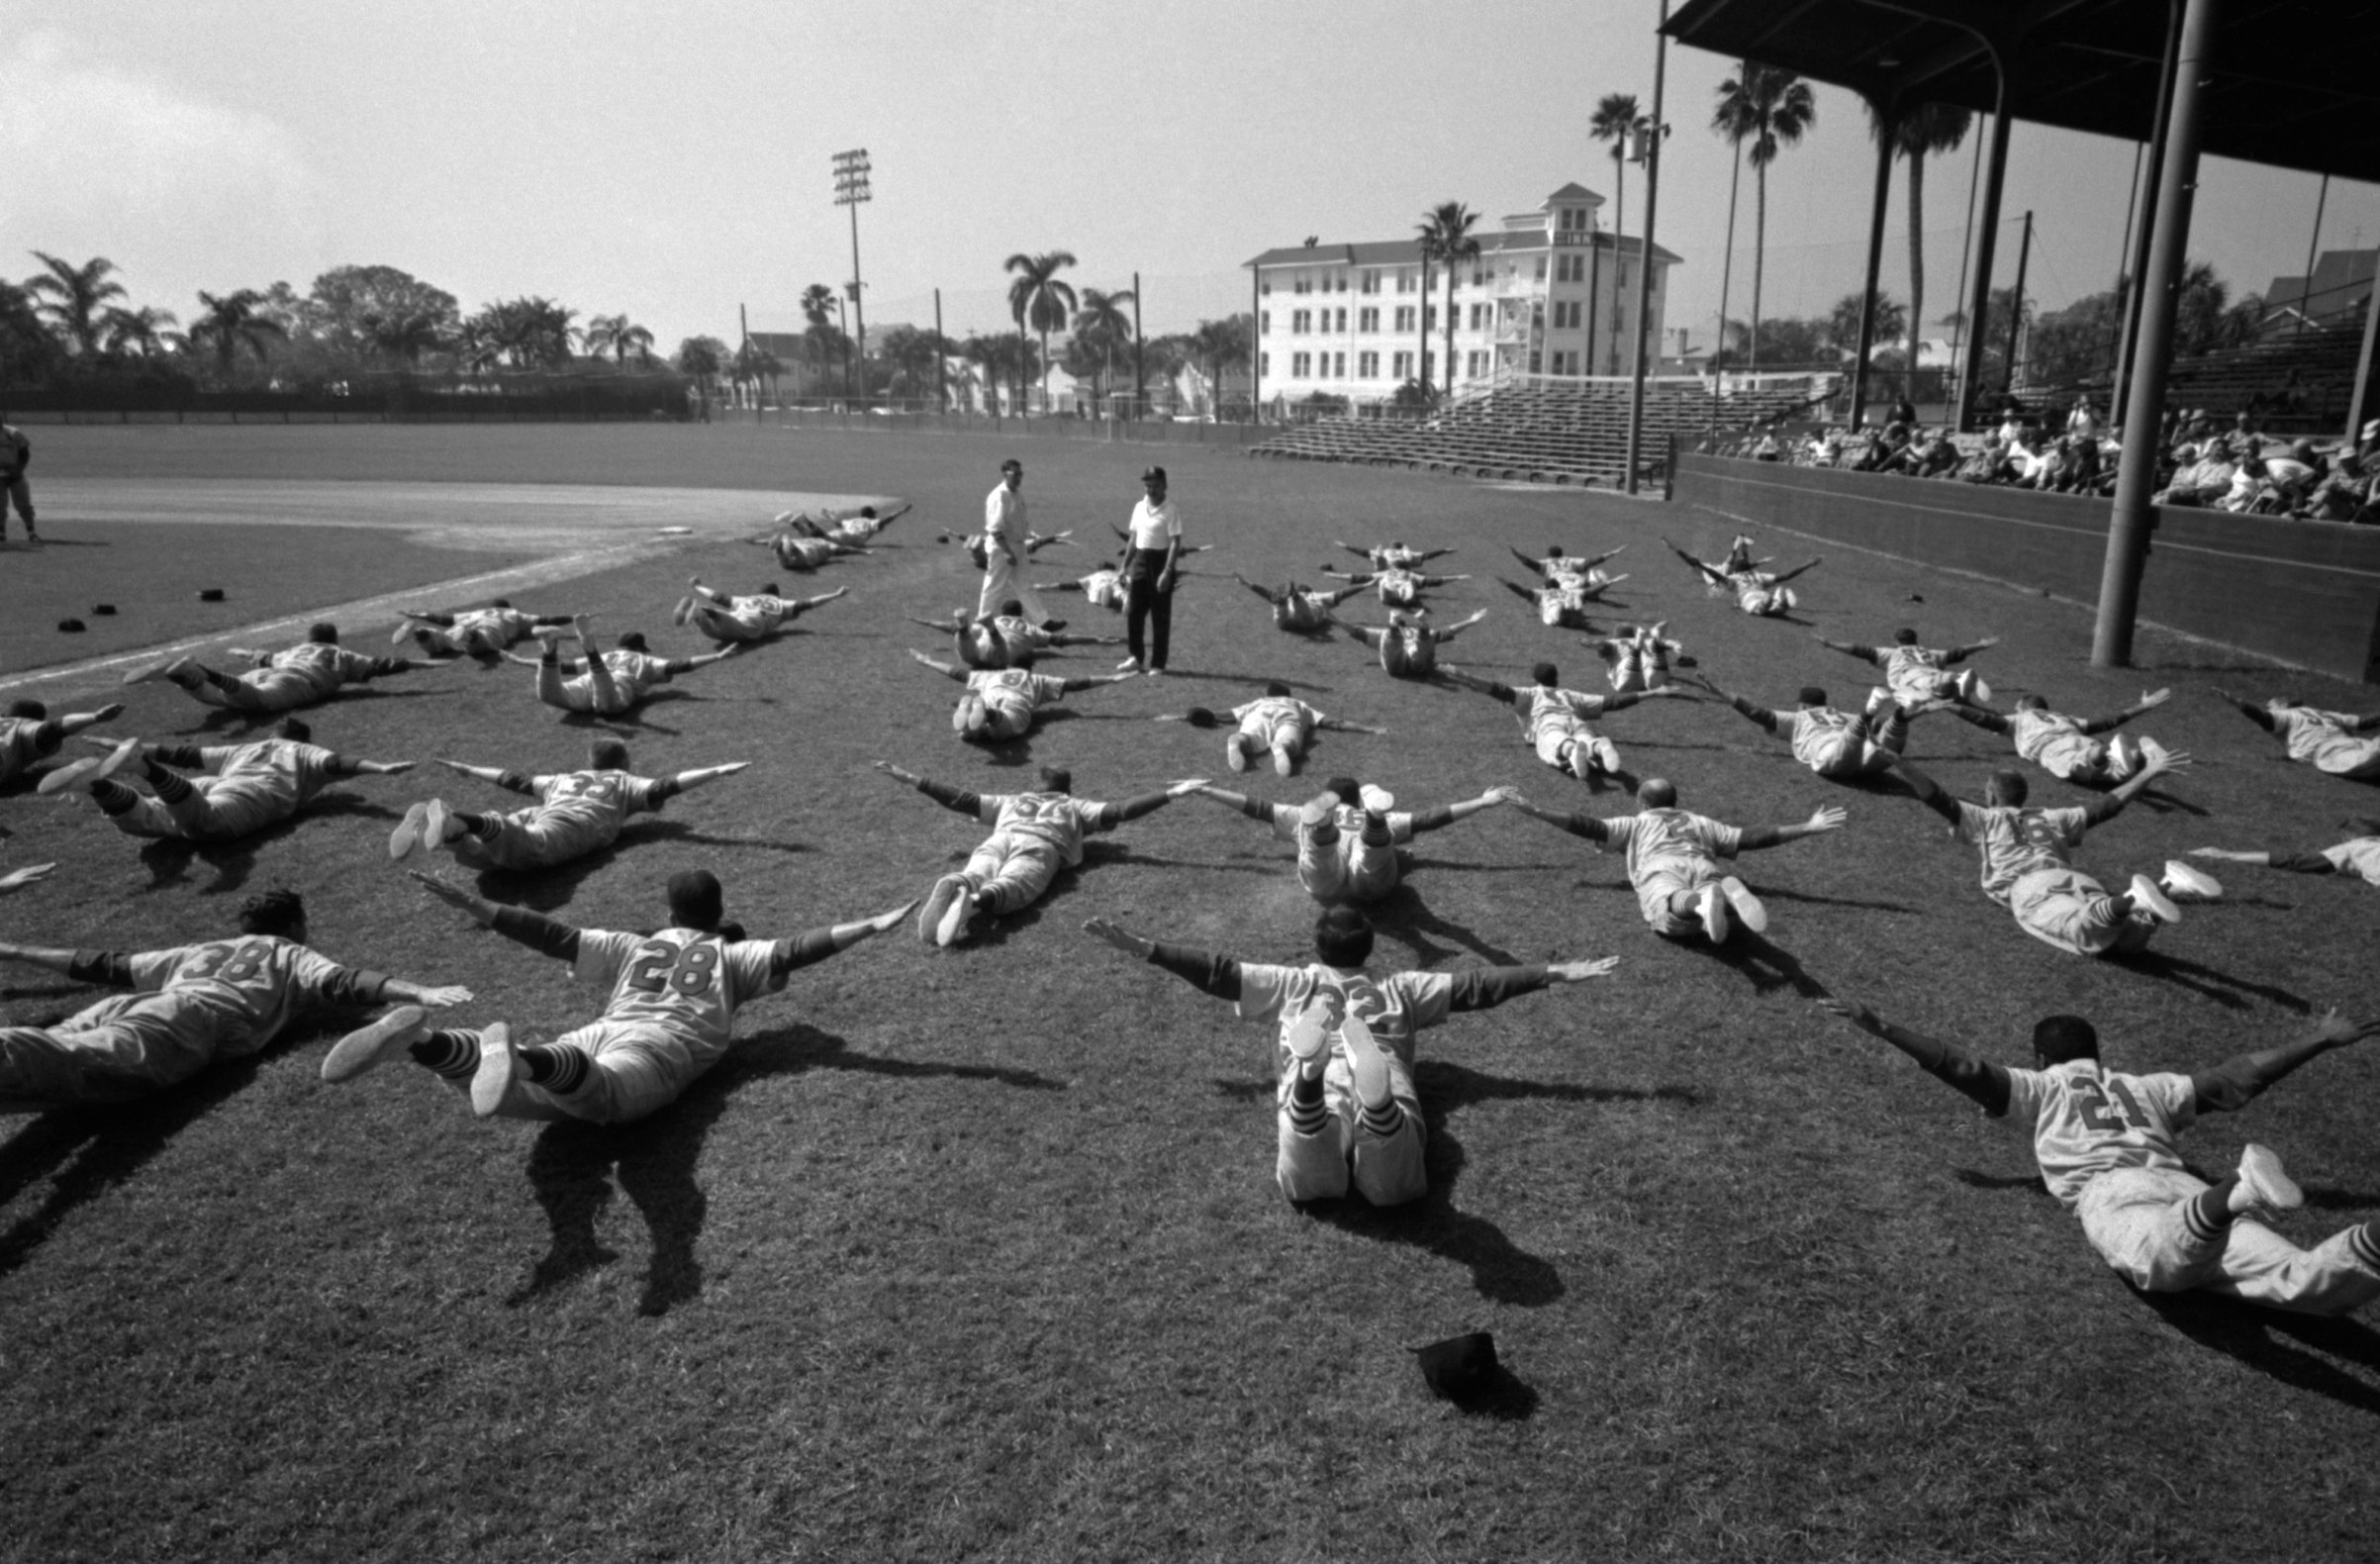 Members of the St. Louis Cardinals stretch during Spring Training in March, 1960 at Al Lang Field in St. Petersburg, Fla. (Diamond Images/Getty Images)